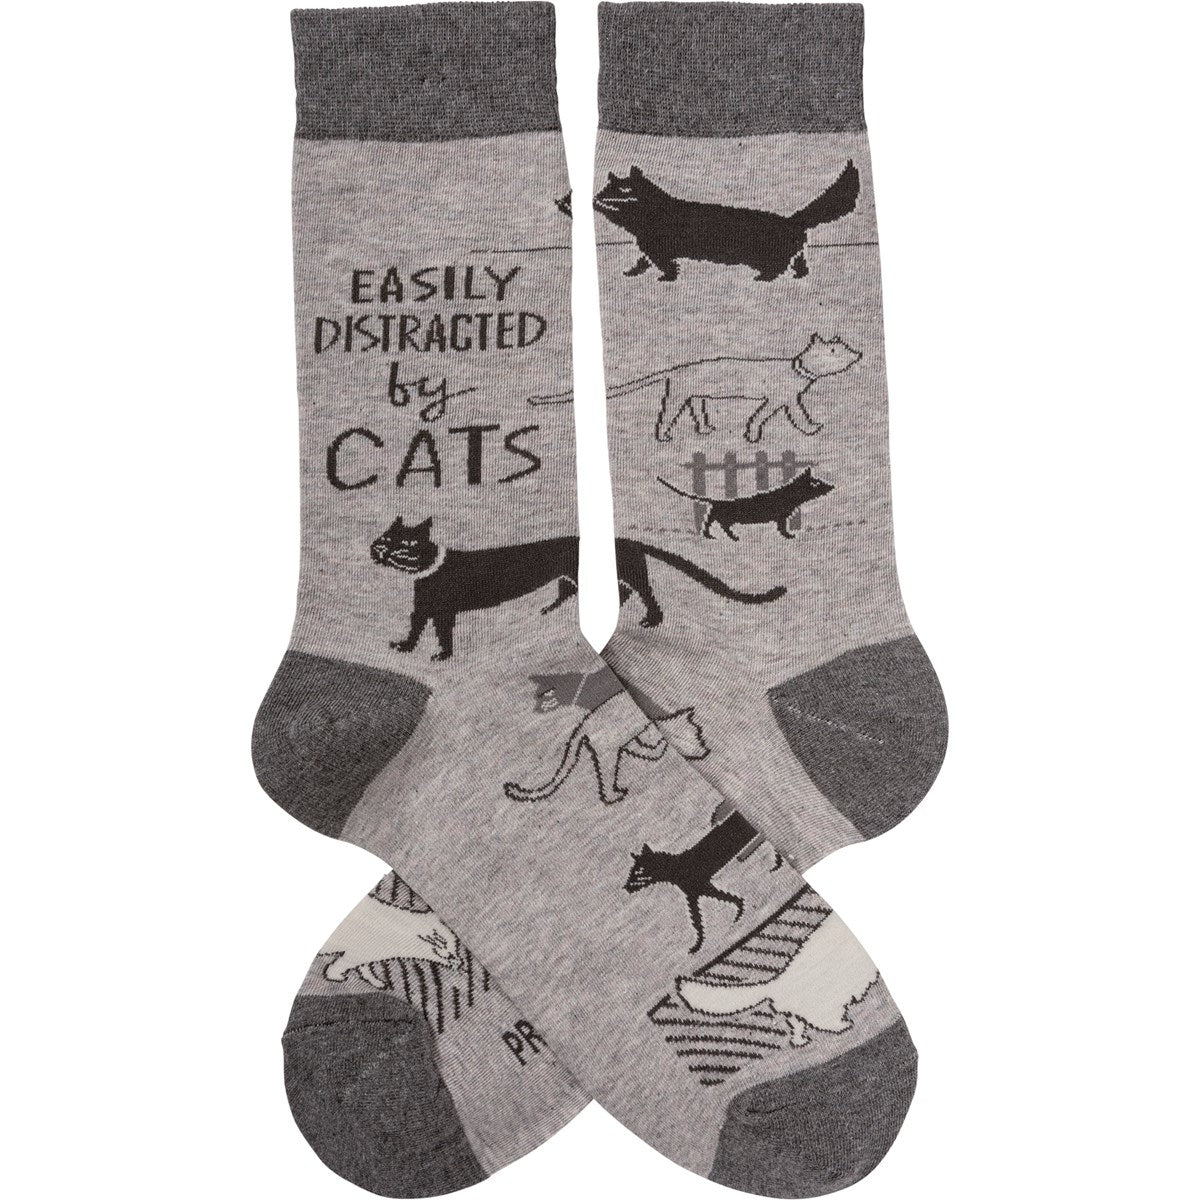 💙 Easily Distracted By Cats Unisex Fun Socks